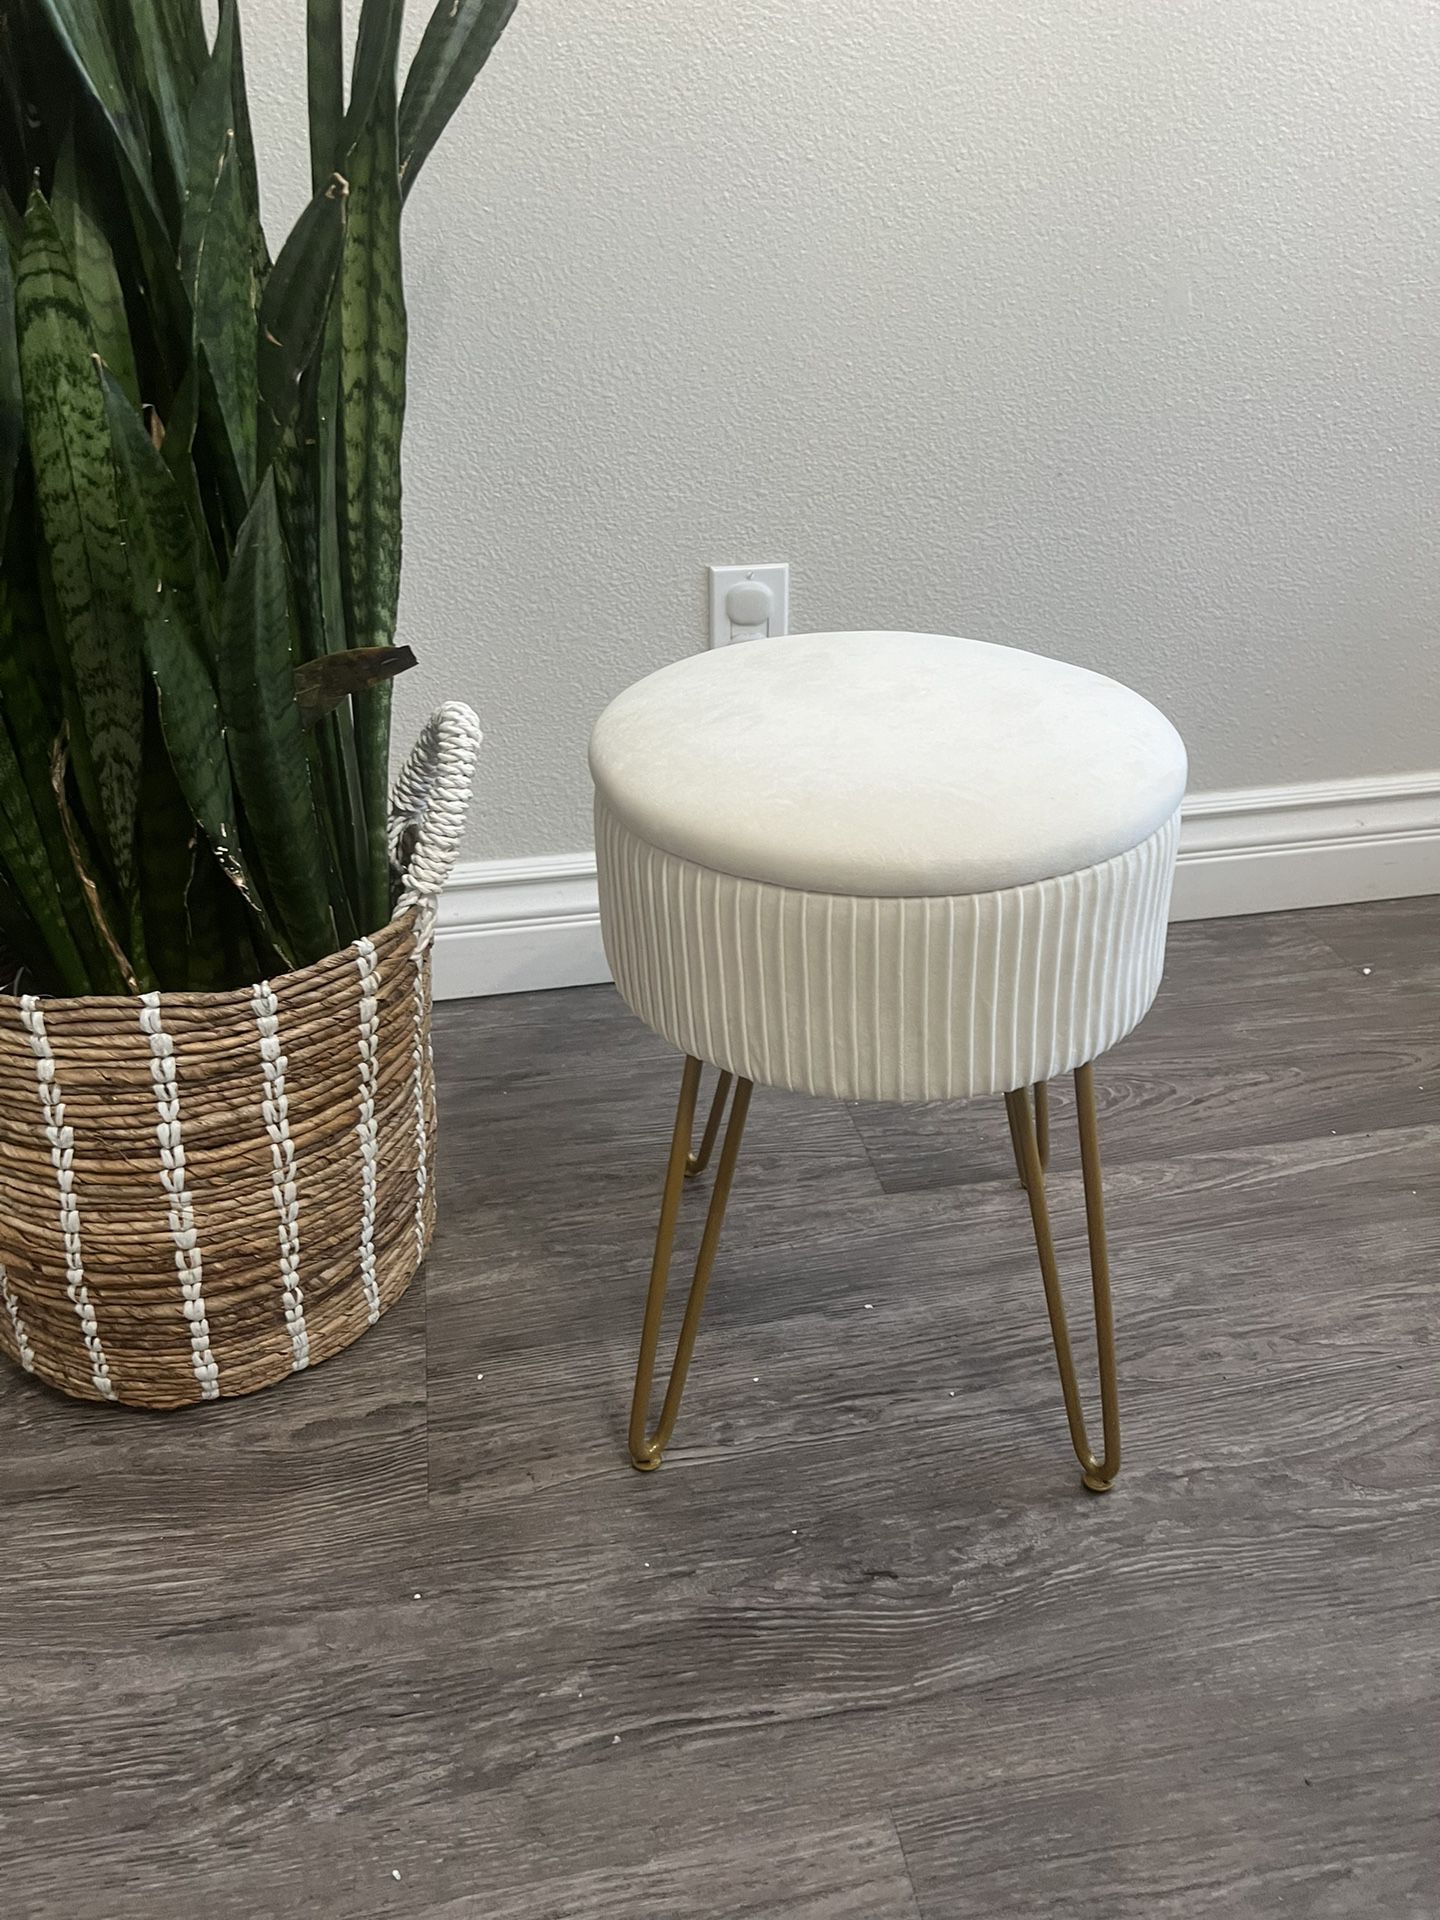 Velvet Vanity Stool Chair for Makeup Room, Beige Vanity Stool with Gold Legs,18” Height, Small Storage Ottoman Foot Ottoman Rest for Living Room, Bath